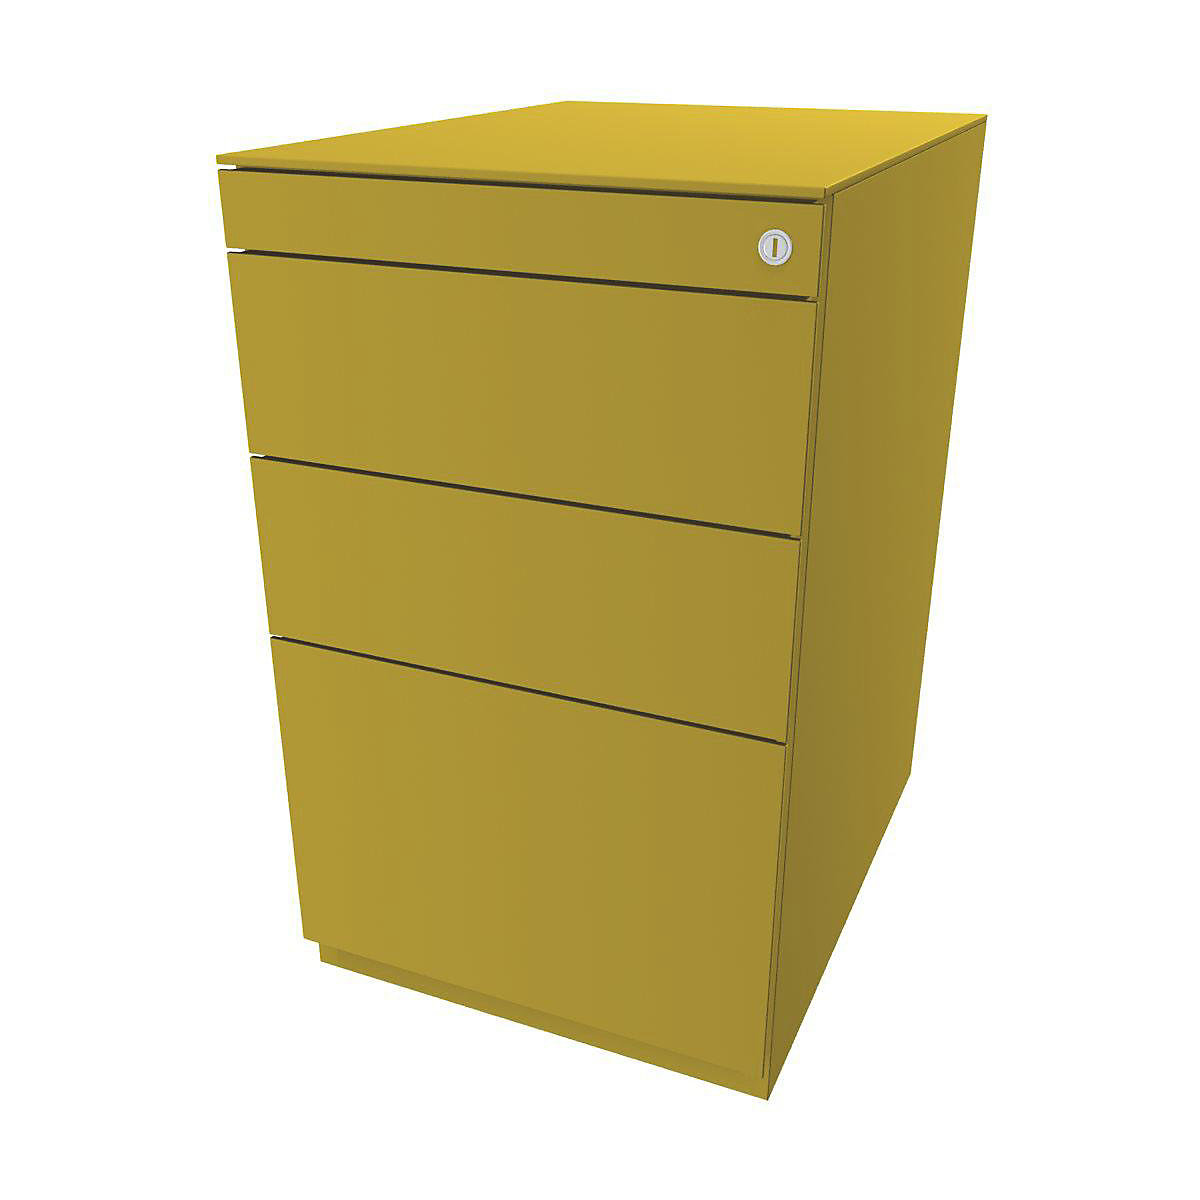 Note™ fixed pedestal, with 2 universal drawers, 1 suspension file drawer – BISLEY, with top, depth 565 mm, yellow-11